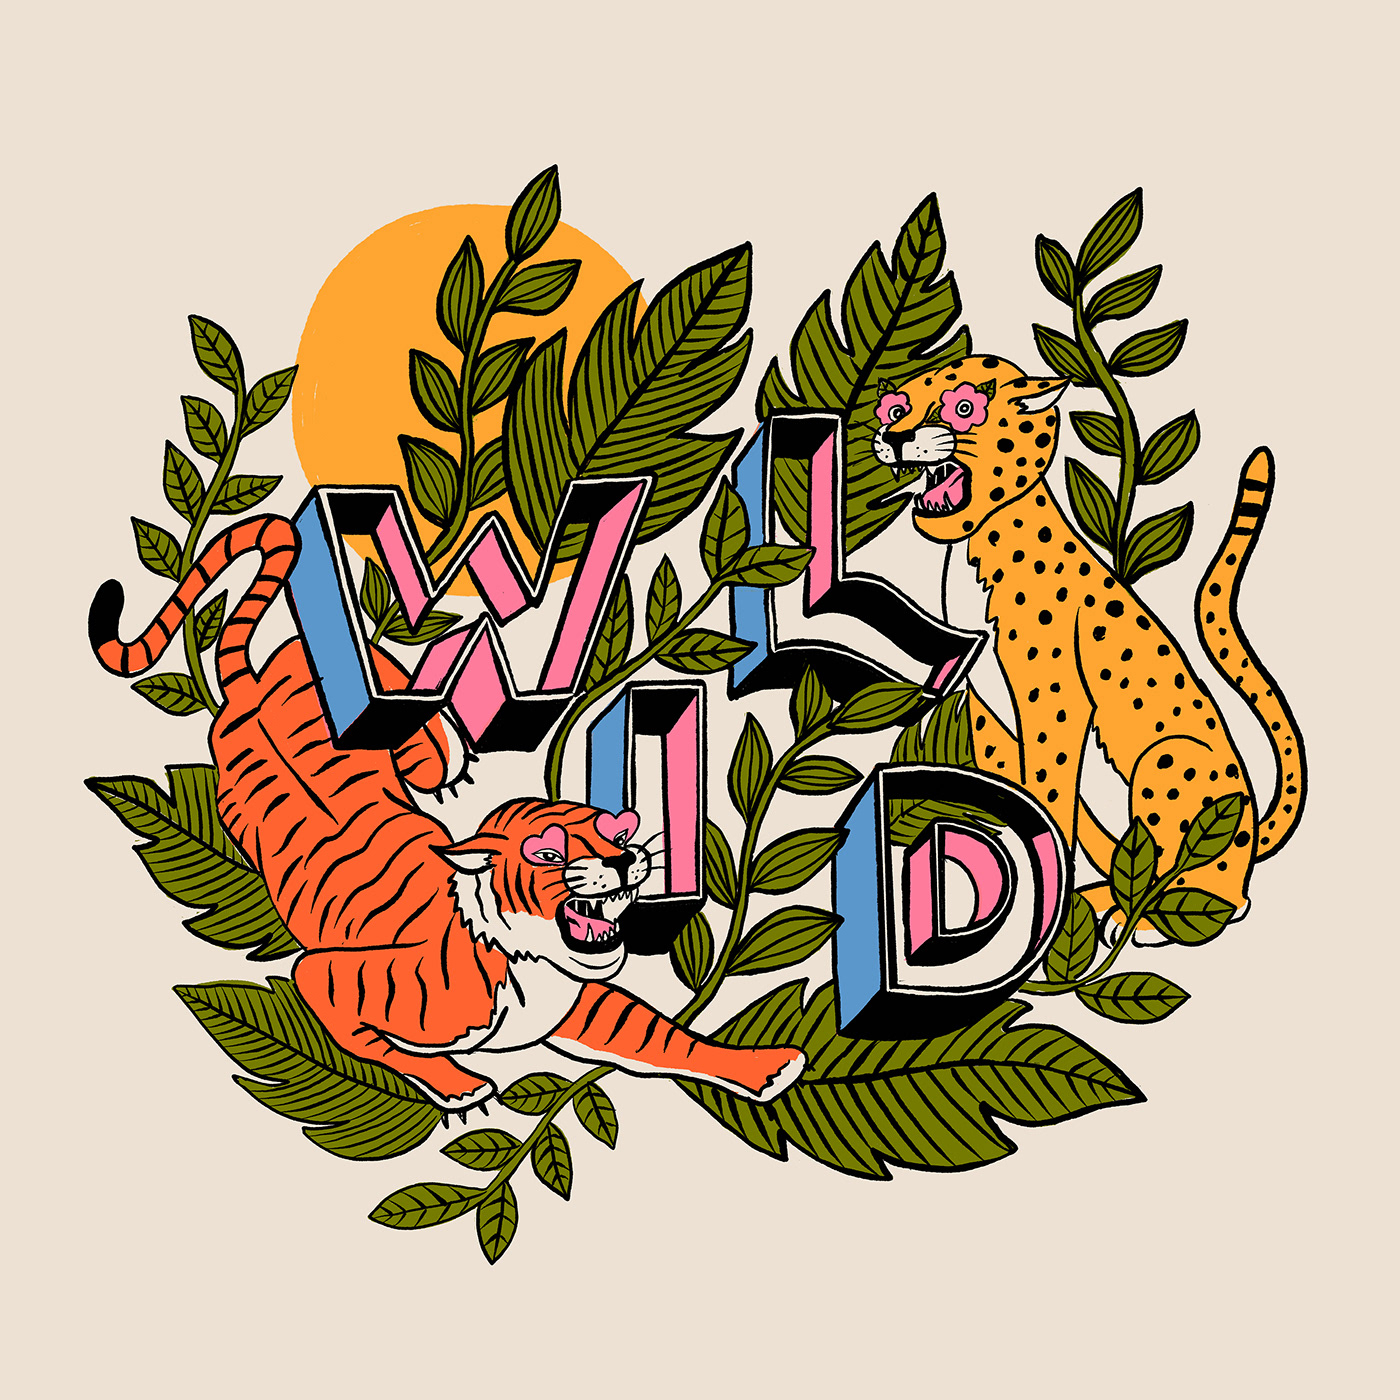 WILD hand lettered type designs in a composition with plants, a sun, a tiger and cheetah.